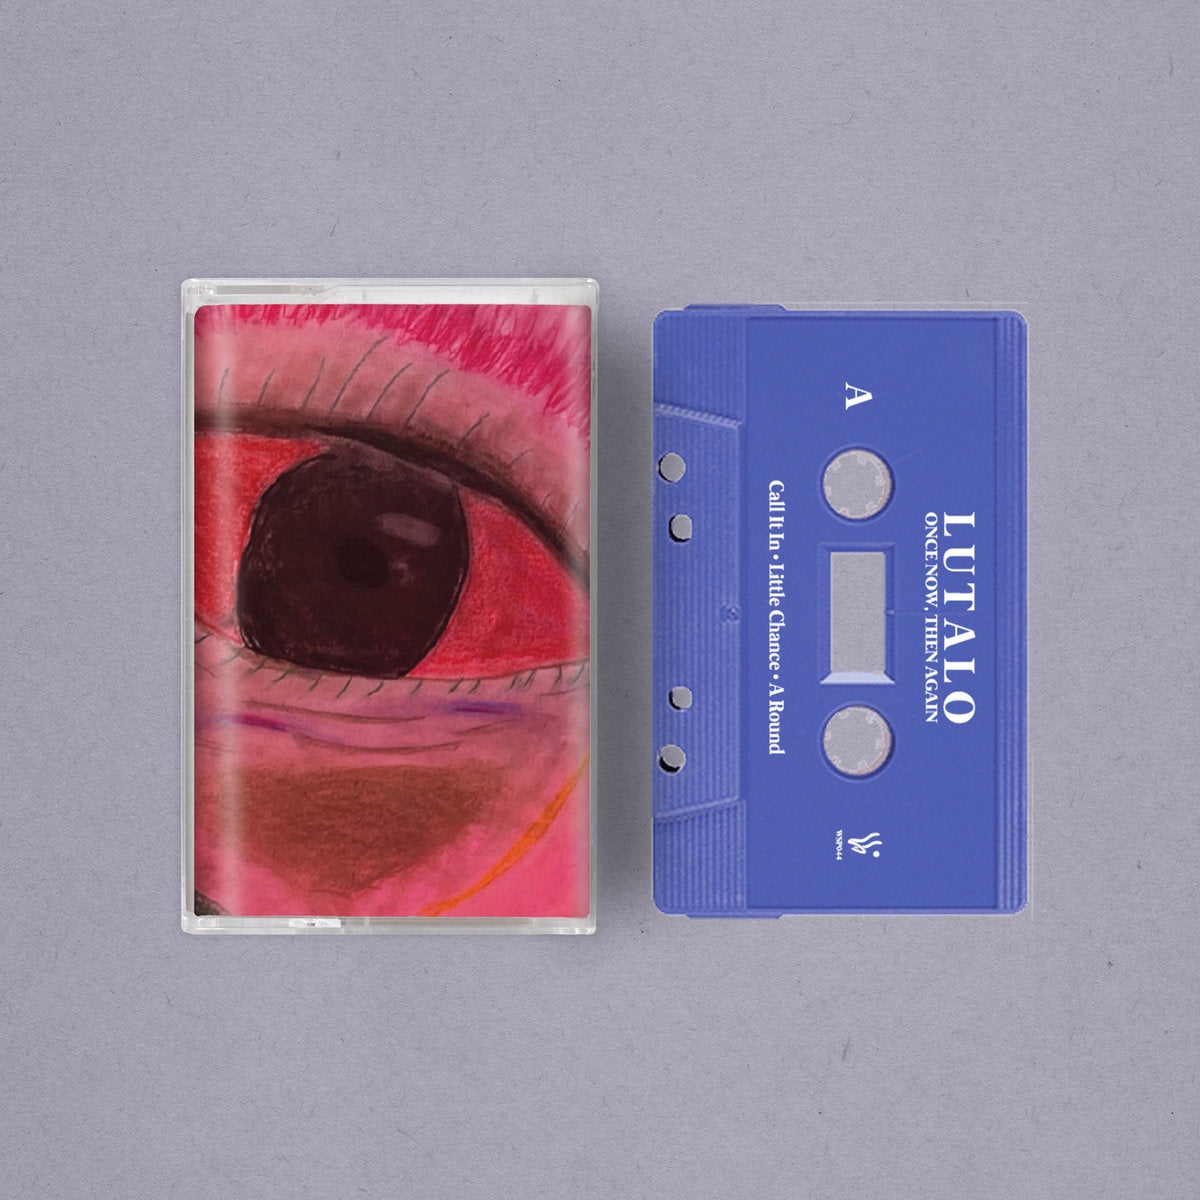 Lutalo - Once Now, Then Again Once Now, Then Again - New Cassette 2023 Winspear Tape - Indie Rock / Folk